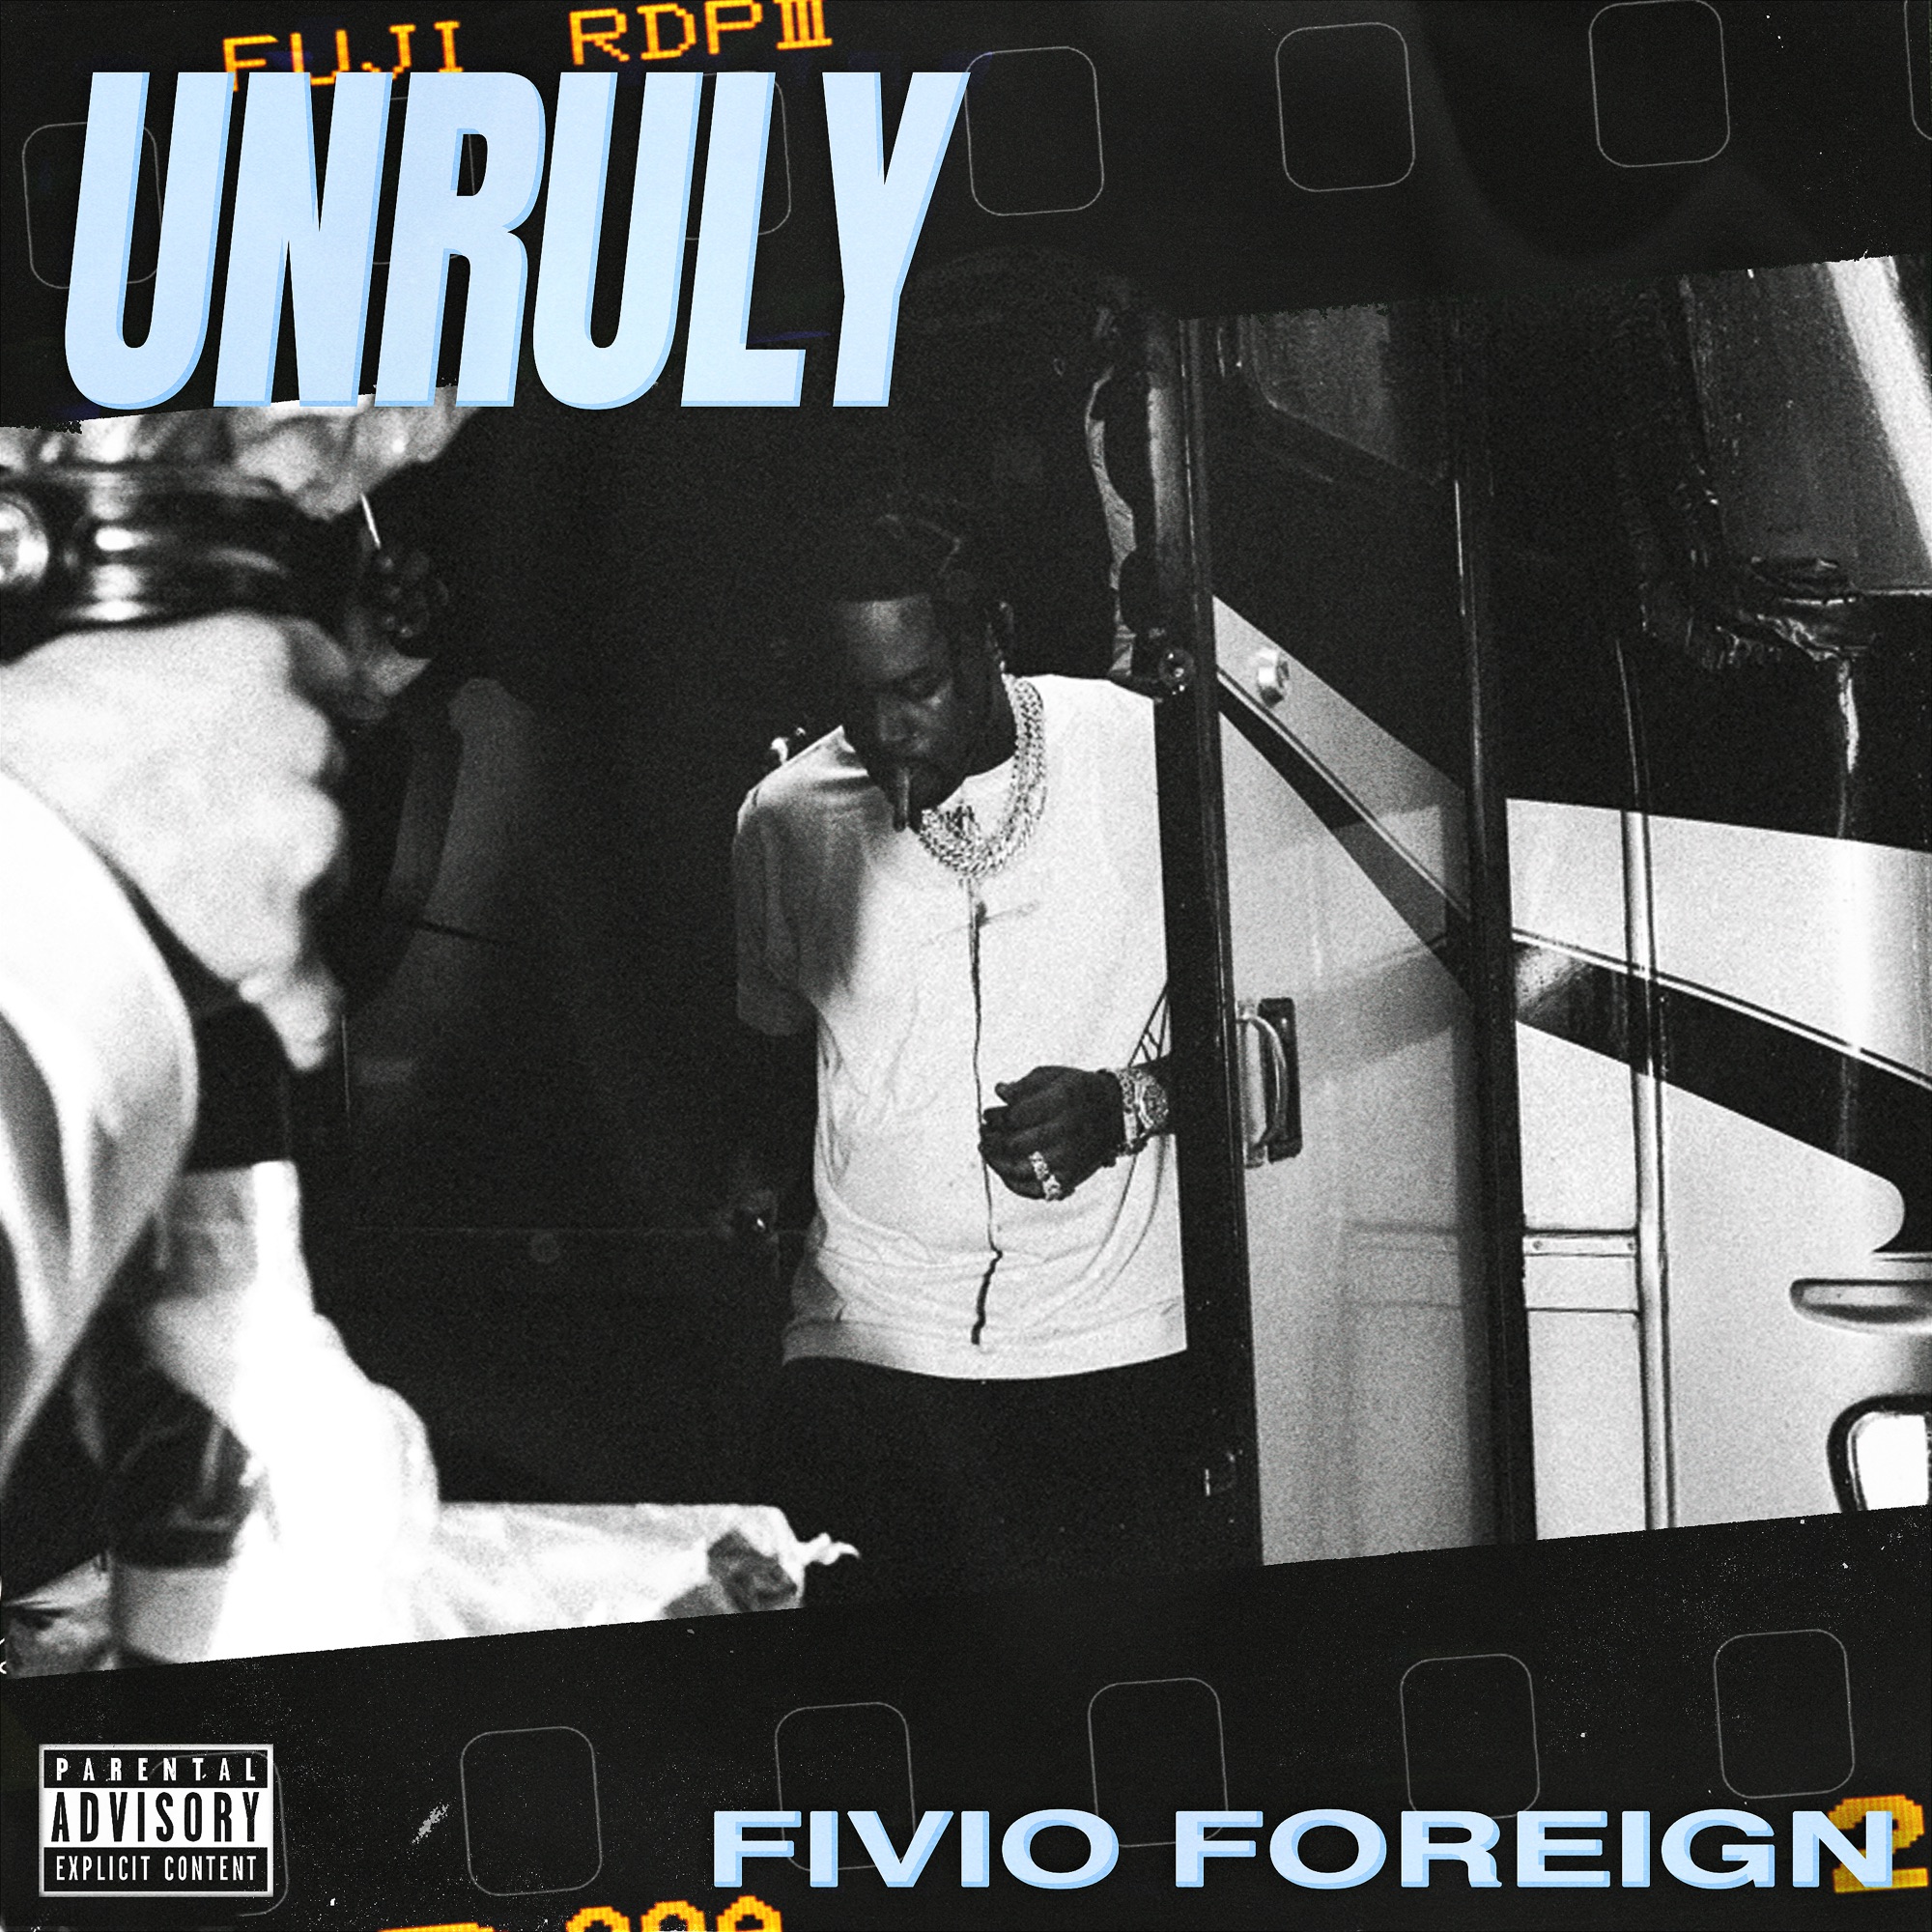 Fivio Foreign - Unruly - Single